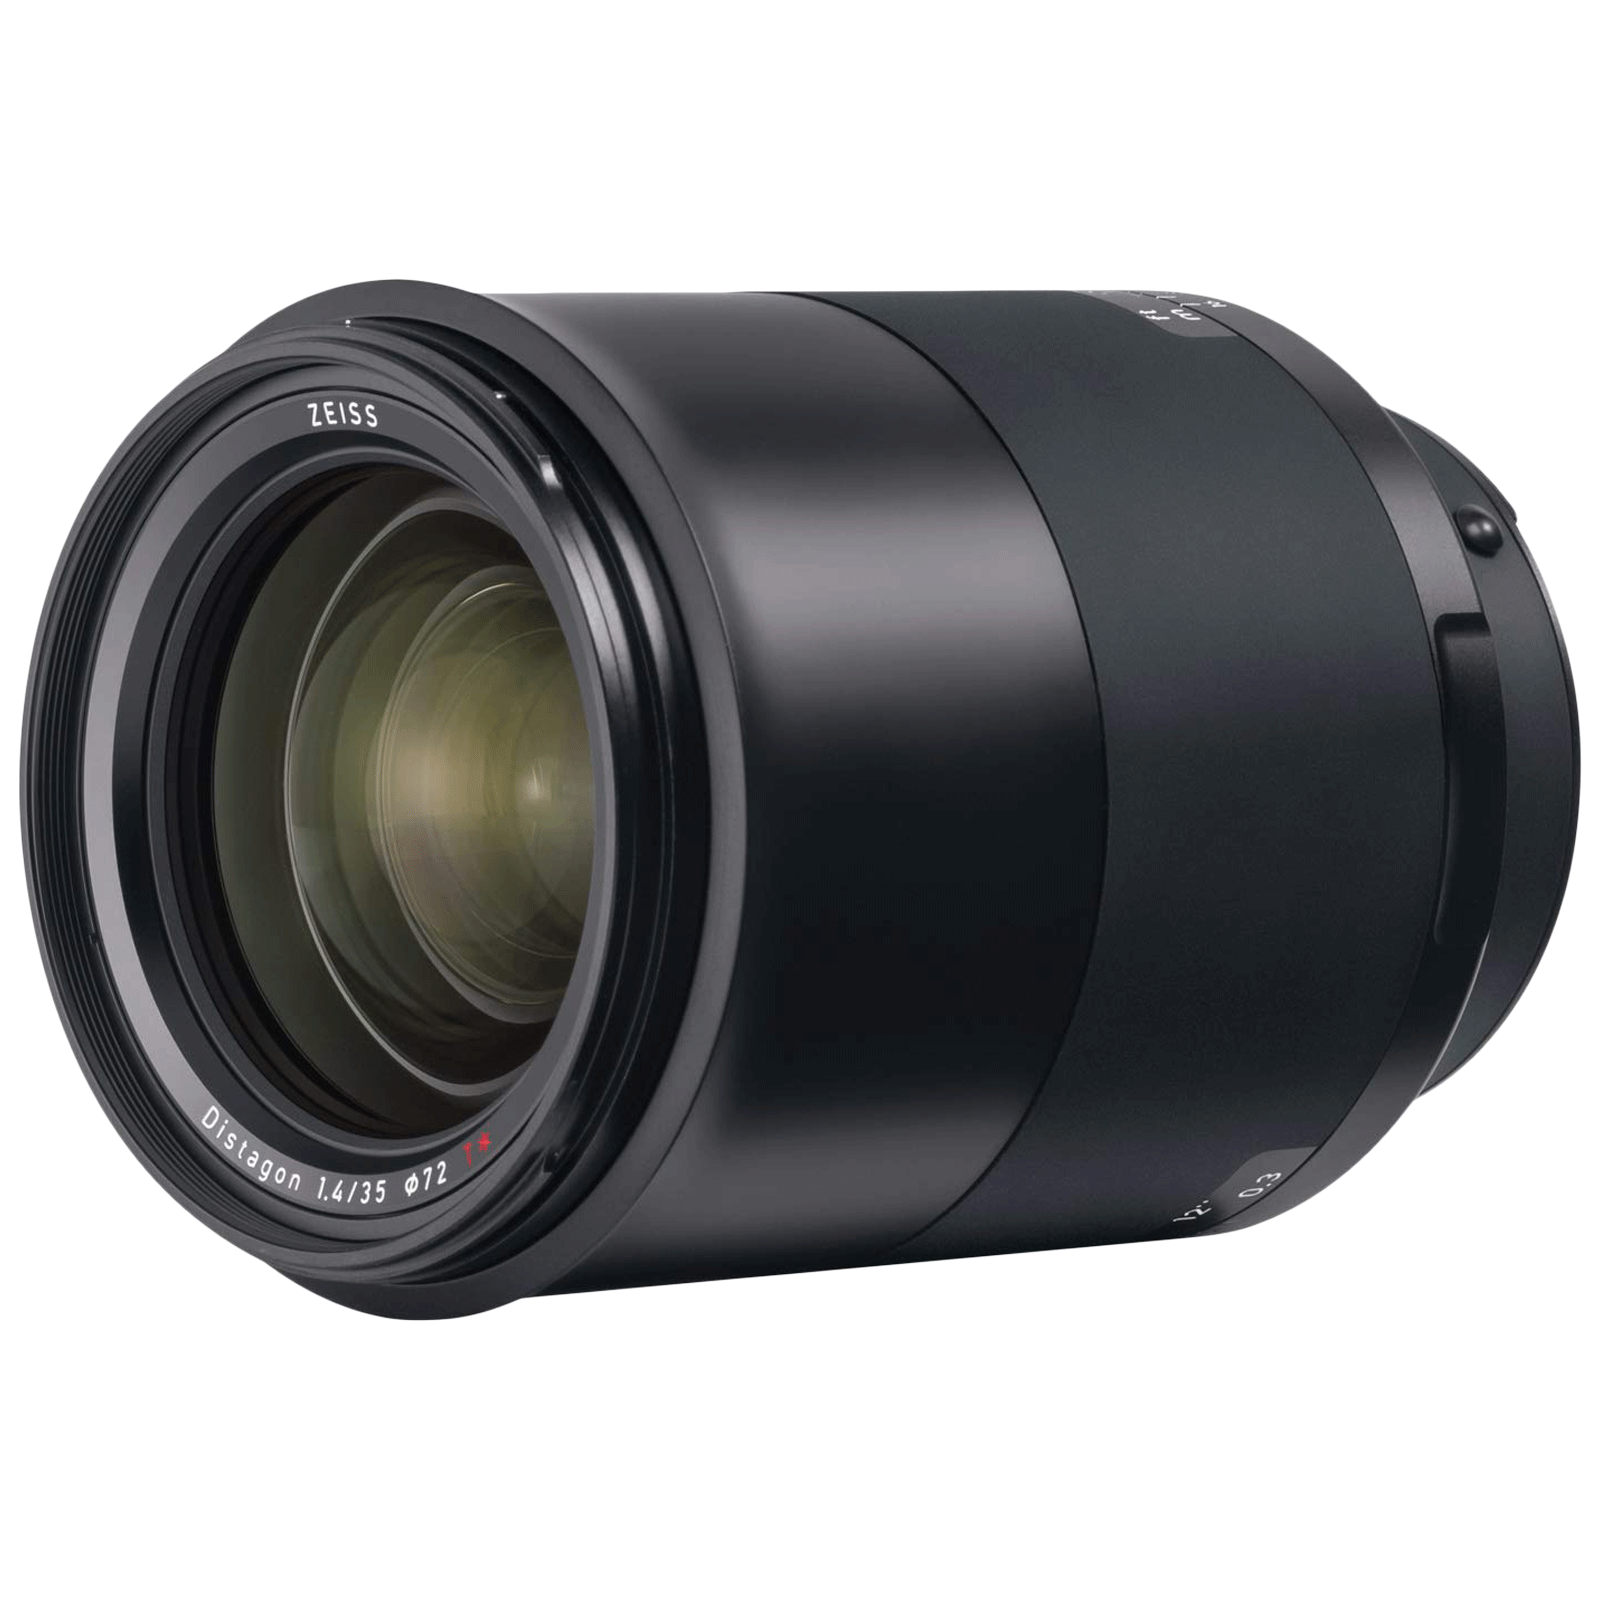 Carl Zeiss Milvus 35mm f/1.4 – f/16 Wide Angle Lens (Dust and Moisture Resistant, 000000-2111-637, Black)_1